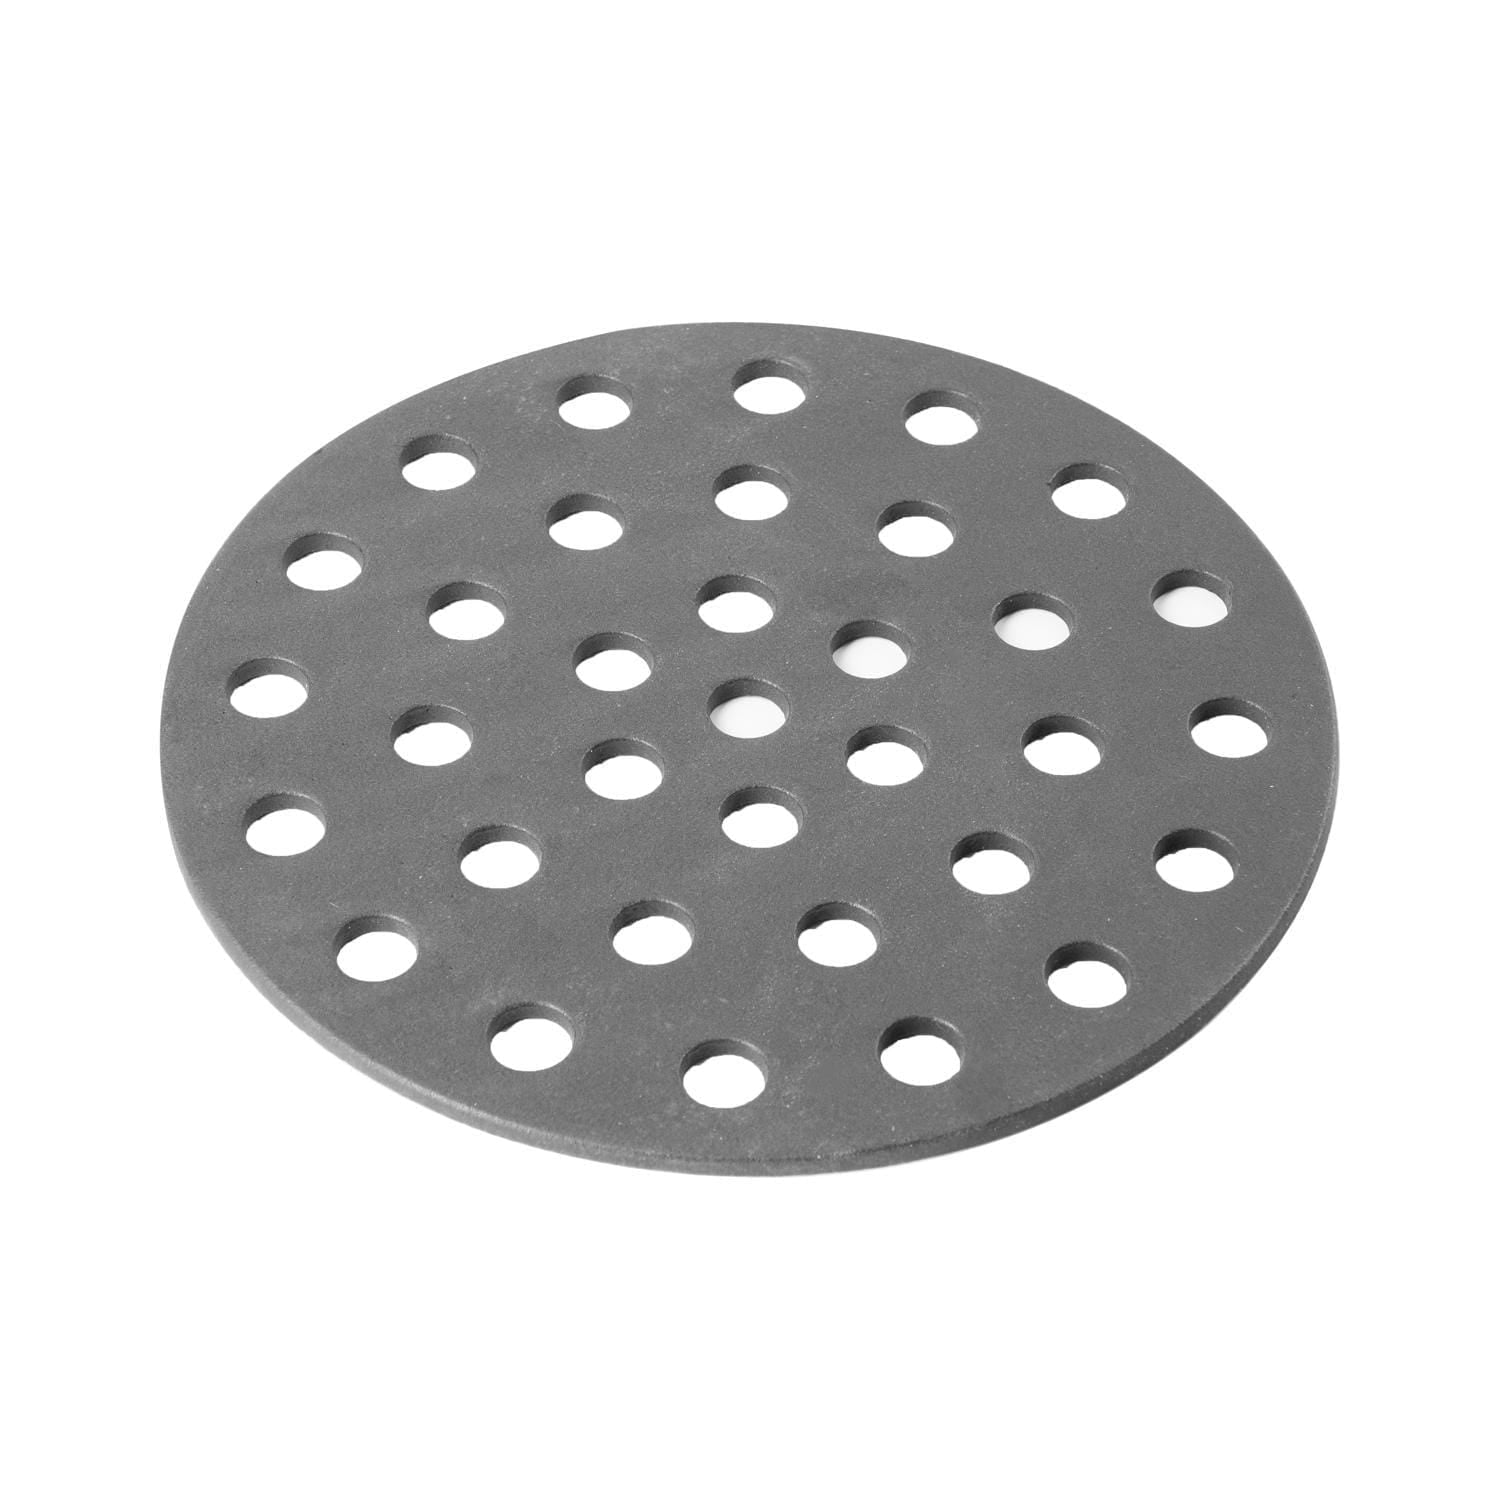 BBQGuys Signature Cast Iron Charcoal Fire Grate For Kamado Grills